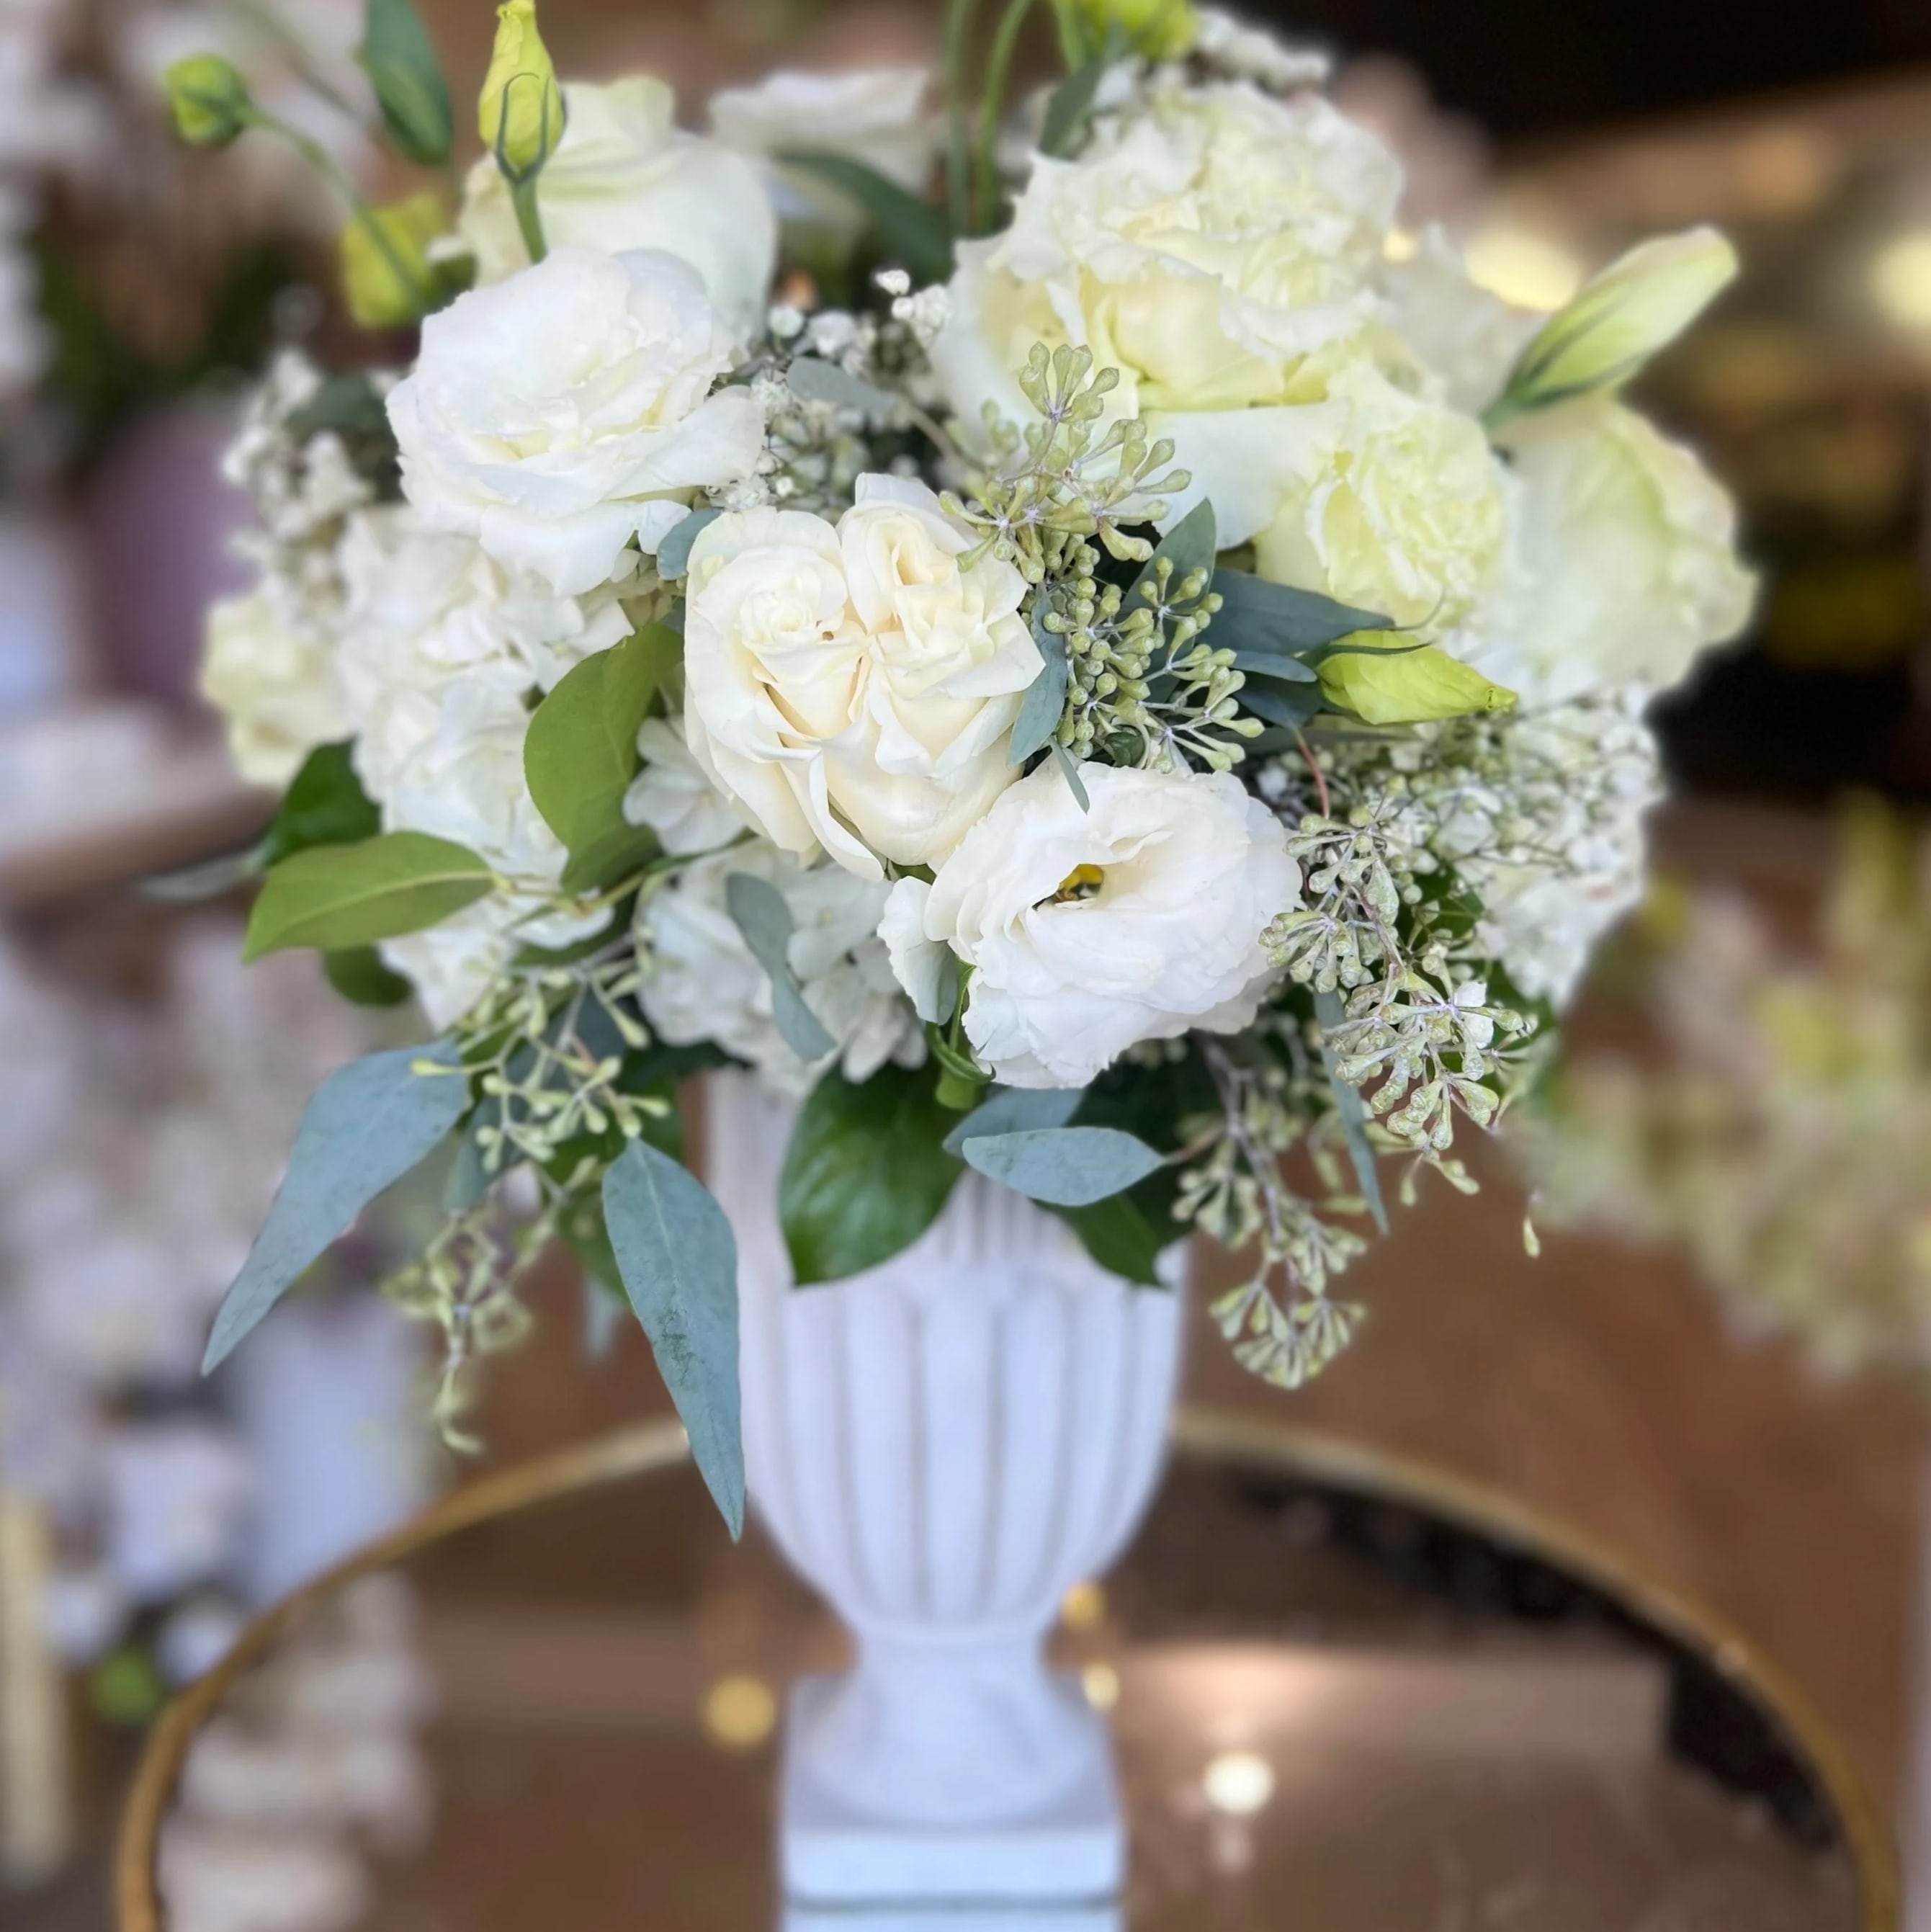 All White Bouquet  - Gorgeous all white blooms including roses, hydrangeas and lisianthus in stunning urn vase 